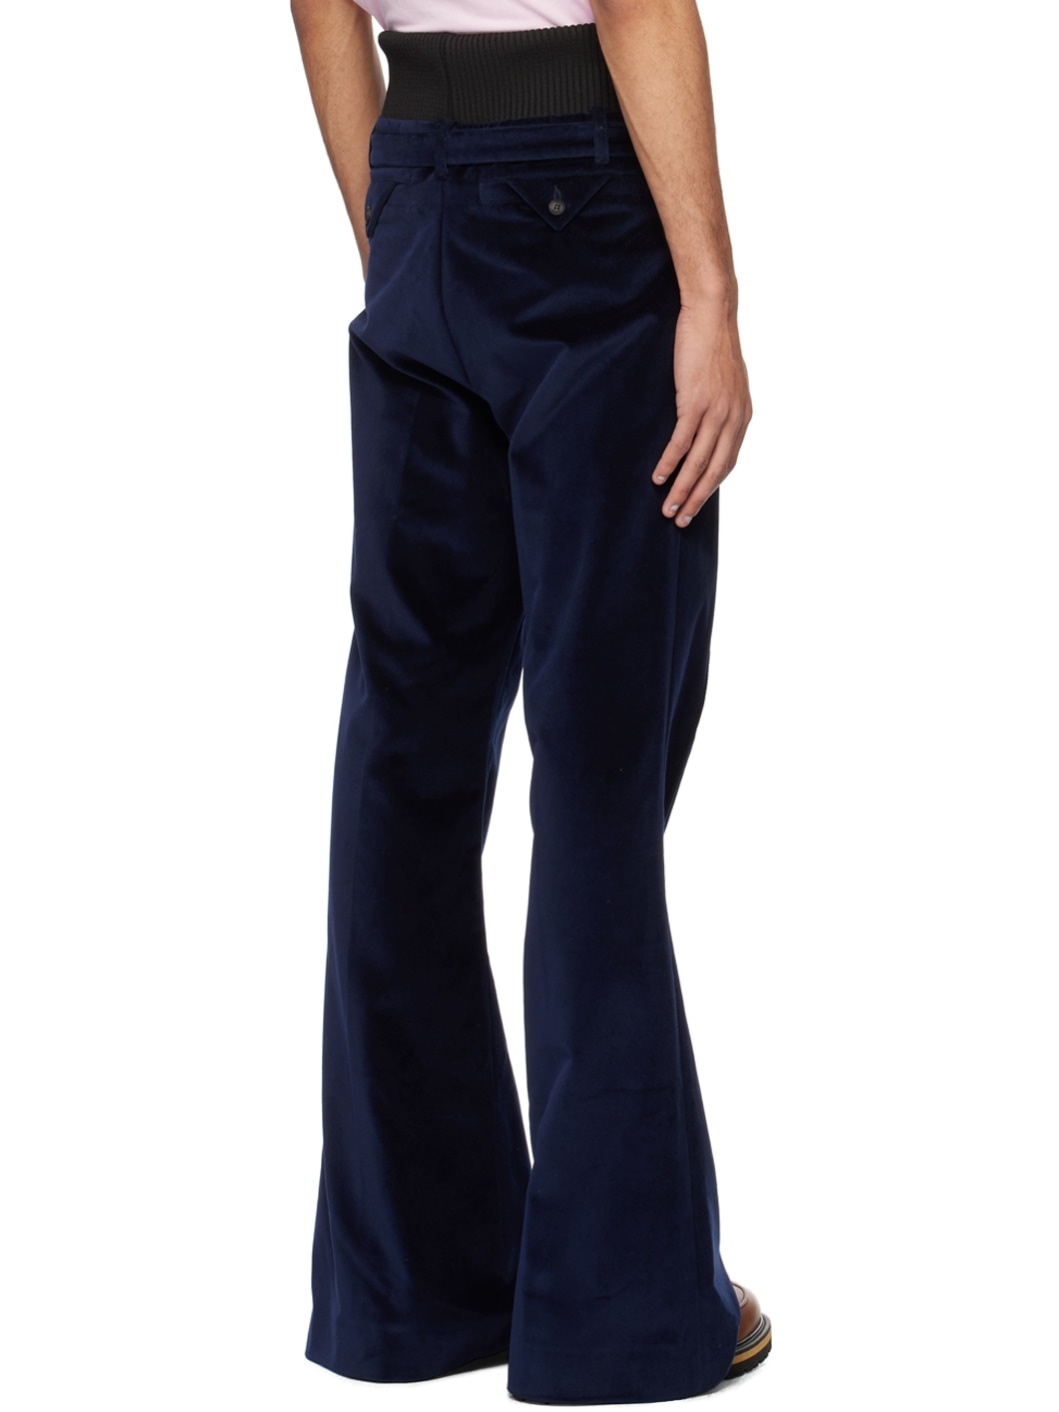 Black & Navy Tailored Track Pants - 3